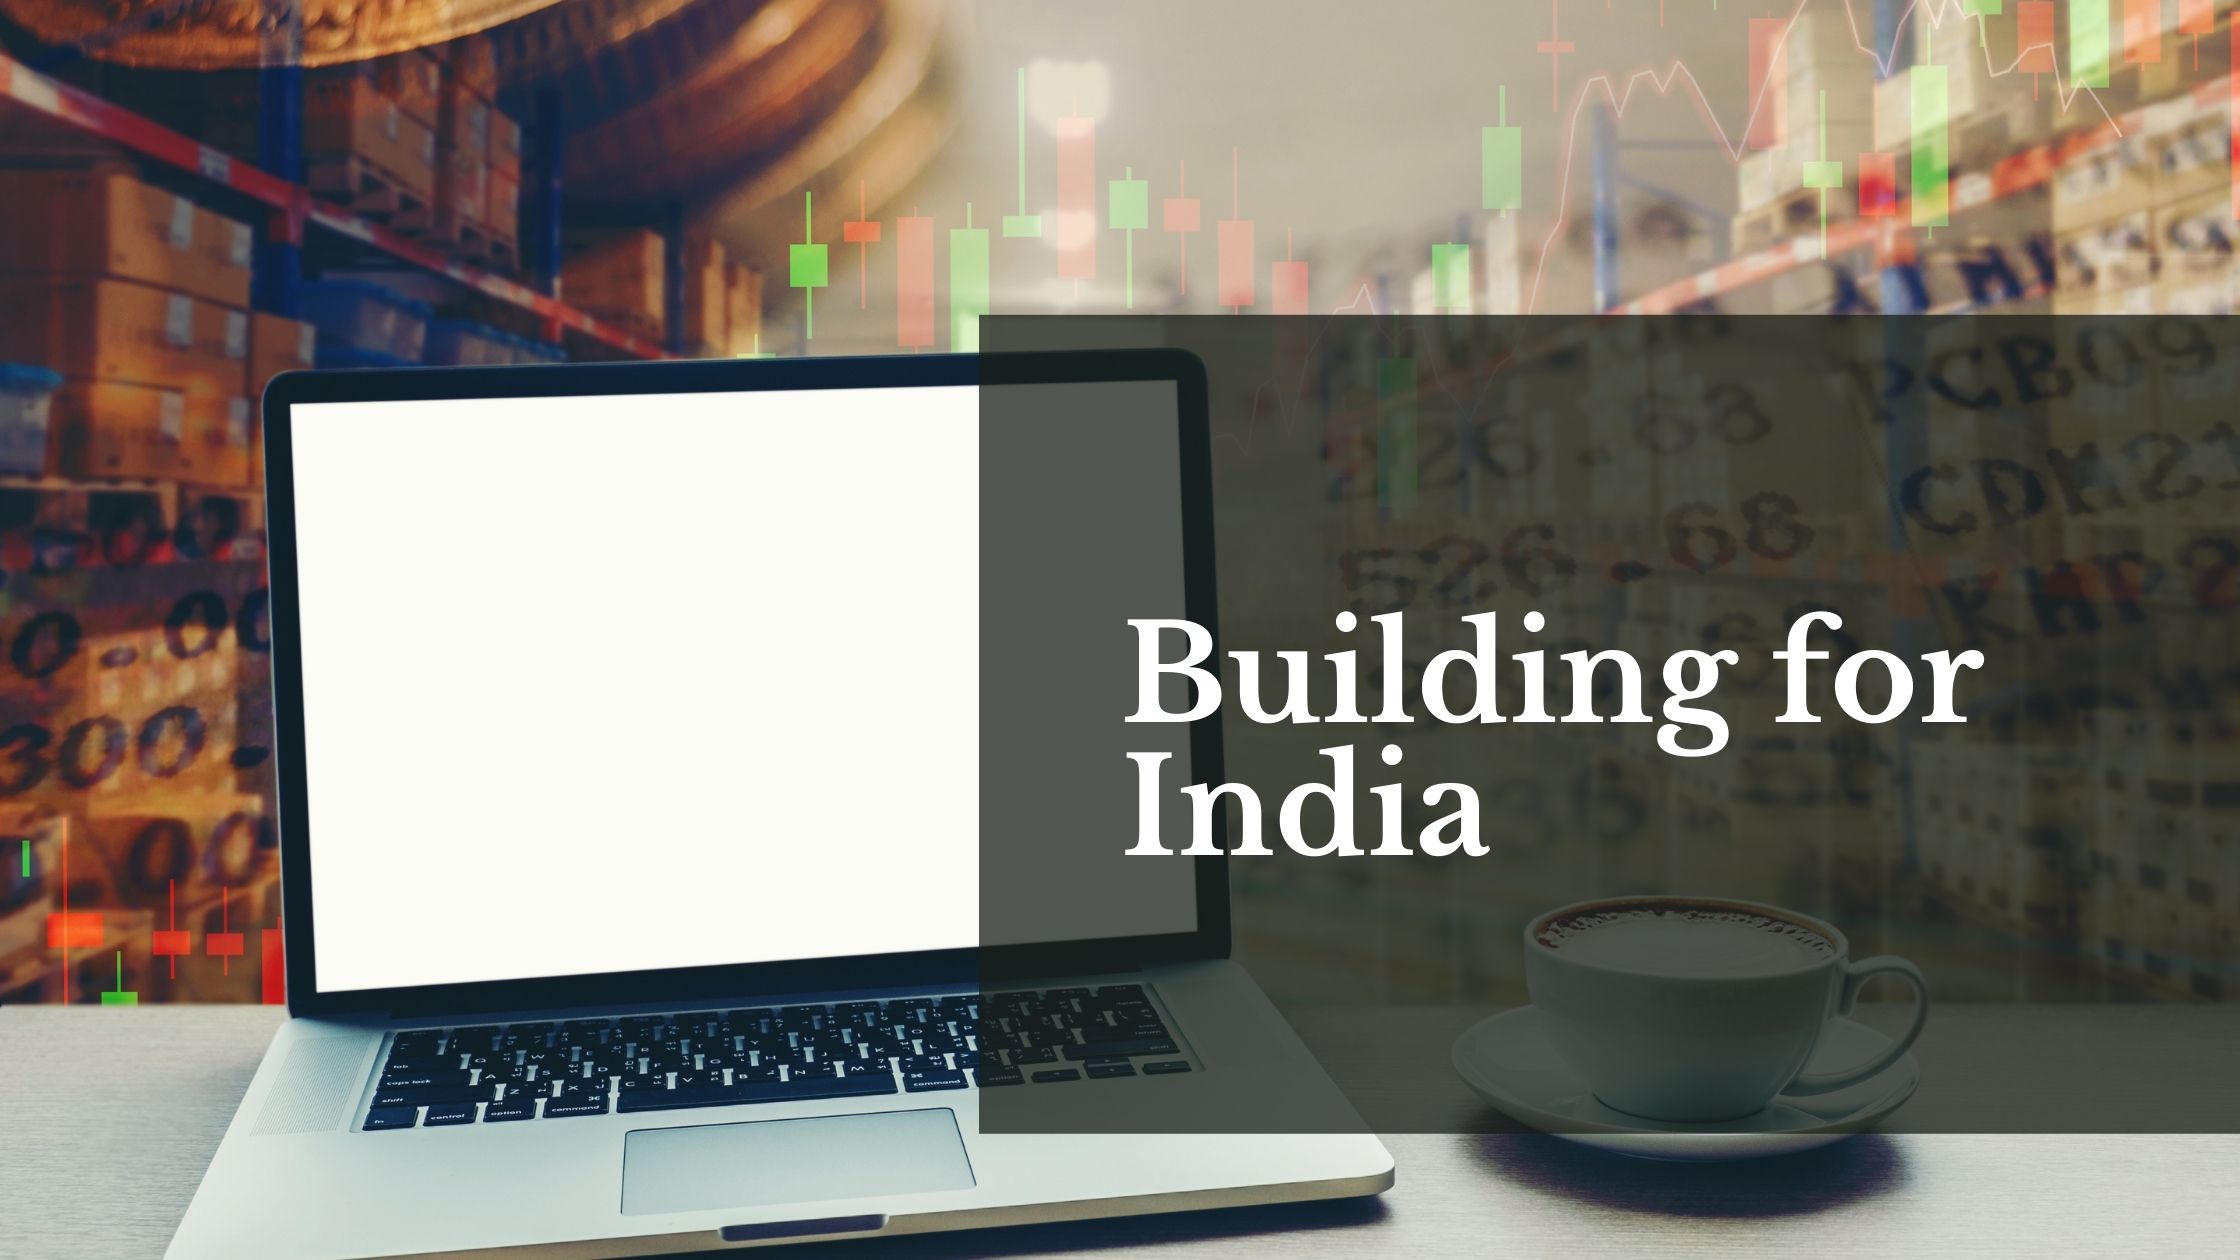 Building for India